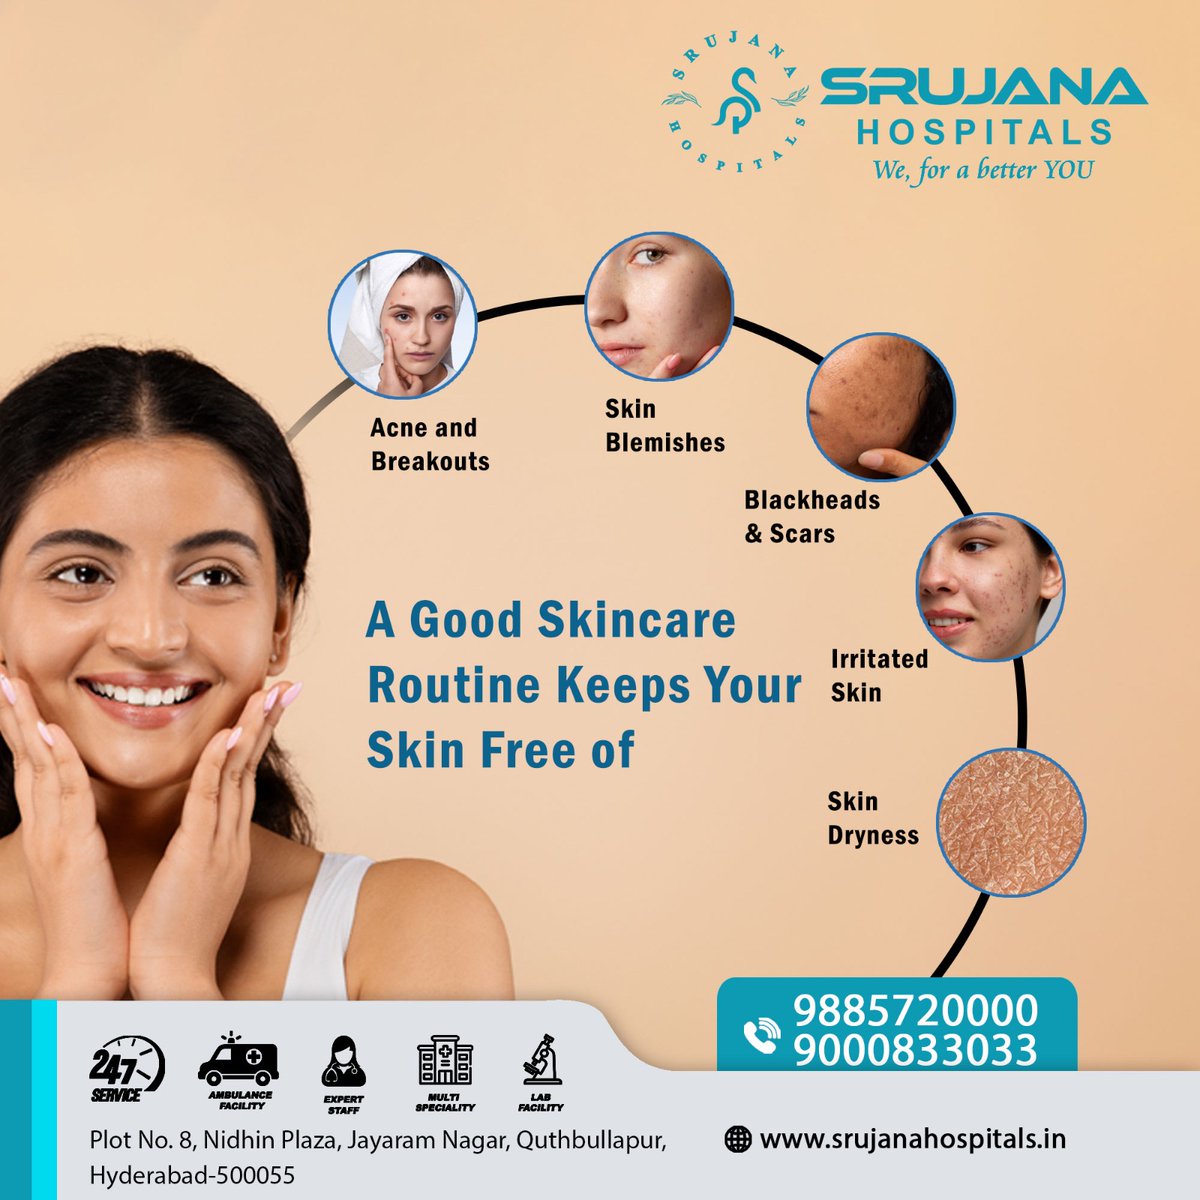 A good skincare routine keeps your skin free of
- Acne and Breakouts
- Skin Blemishes
- Blackheads & Scars
- Irritated Skin
- Skin Dryness

#Summertips #Skincare #SkinBlemishes #BlackHeadsRemoval #IrritatedSkin #SkinDryness #Srujanahospitals #Quthbullapur